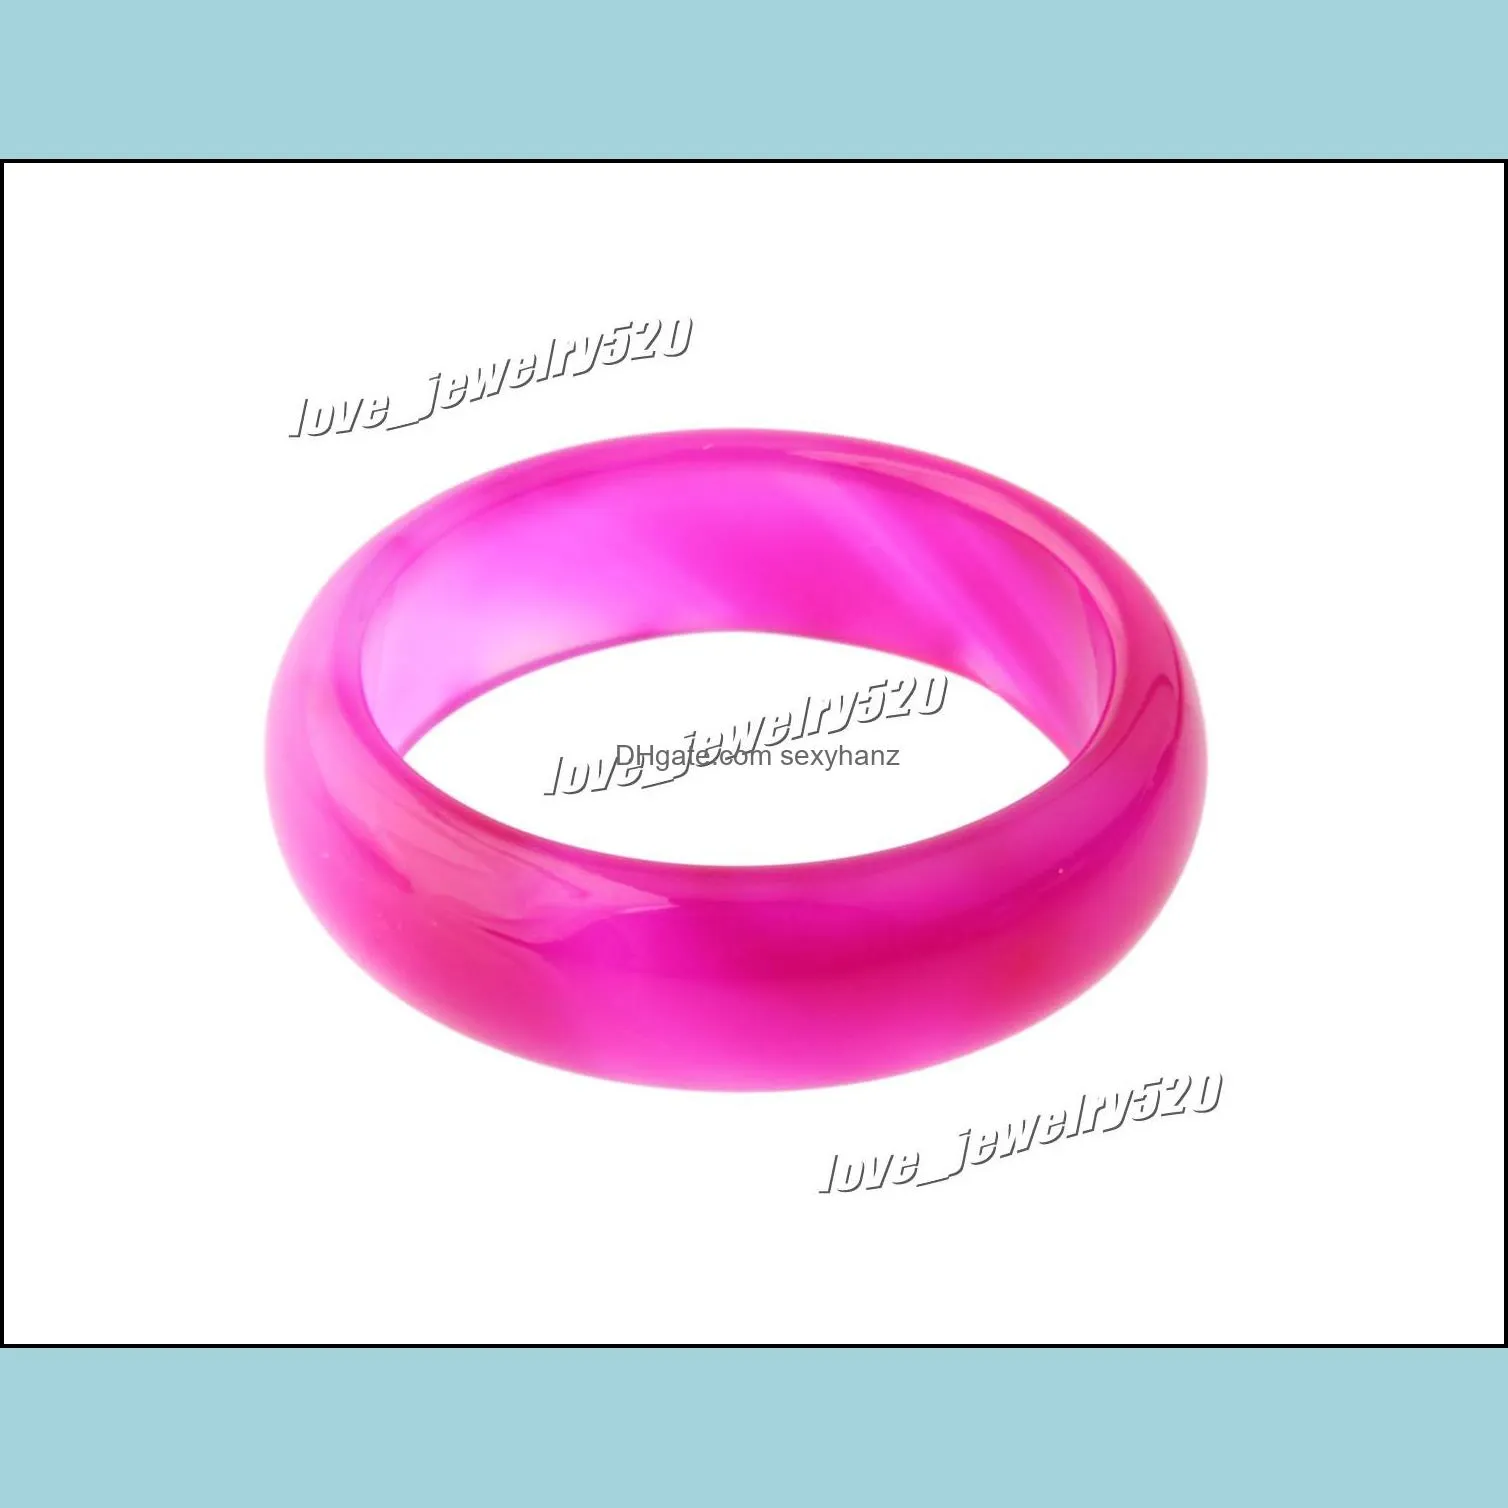 new beautiful smooth roseo round solid jade/agate gem stone band rings 6 mm - great value 20pcs lots